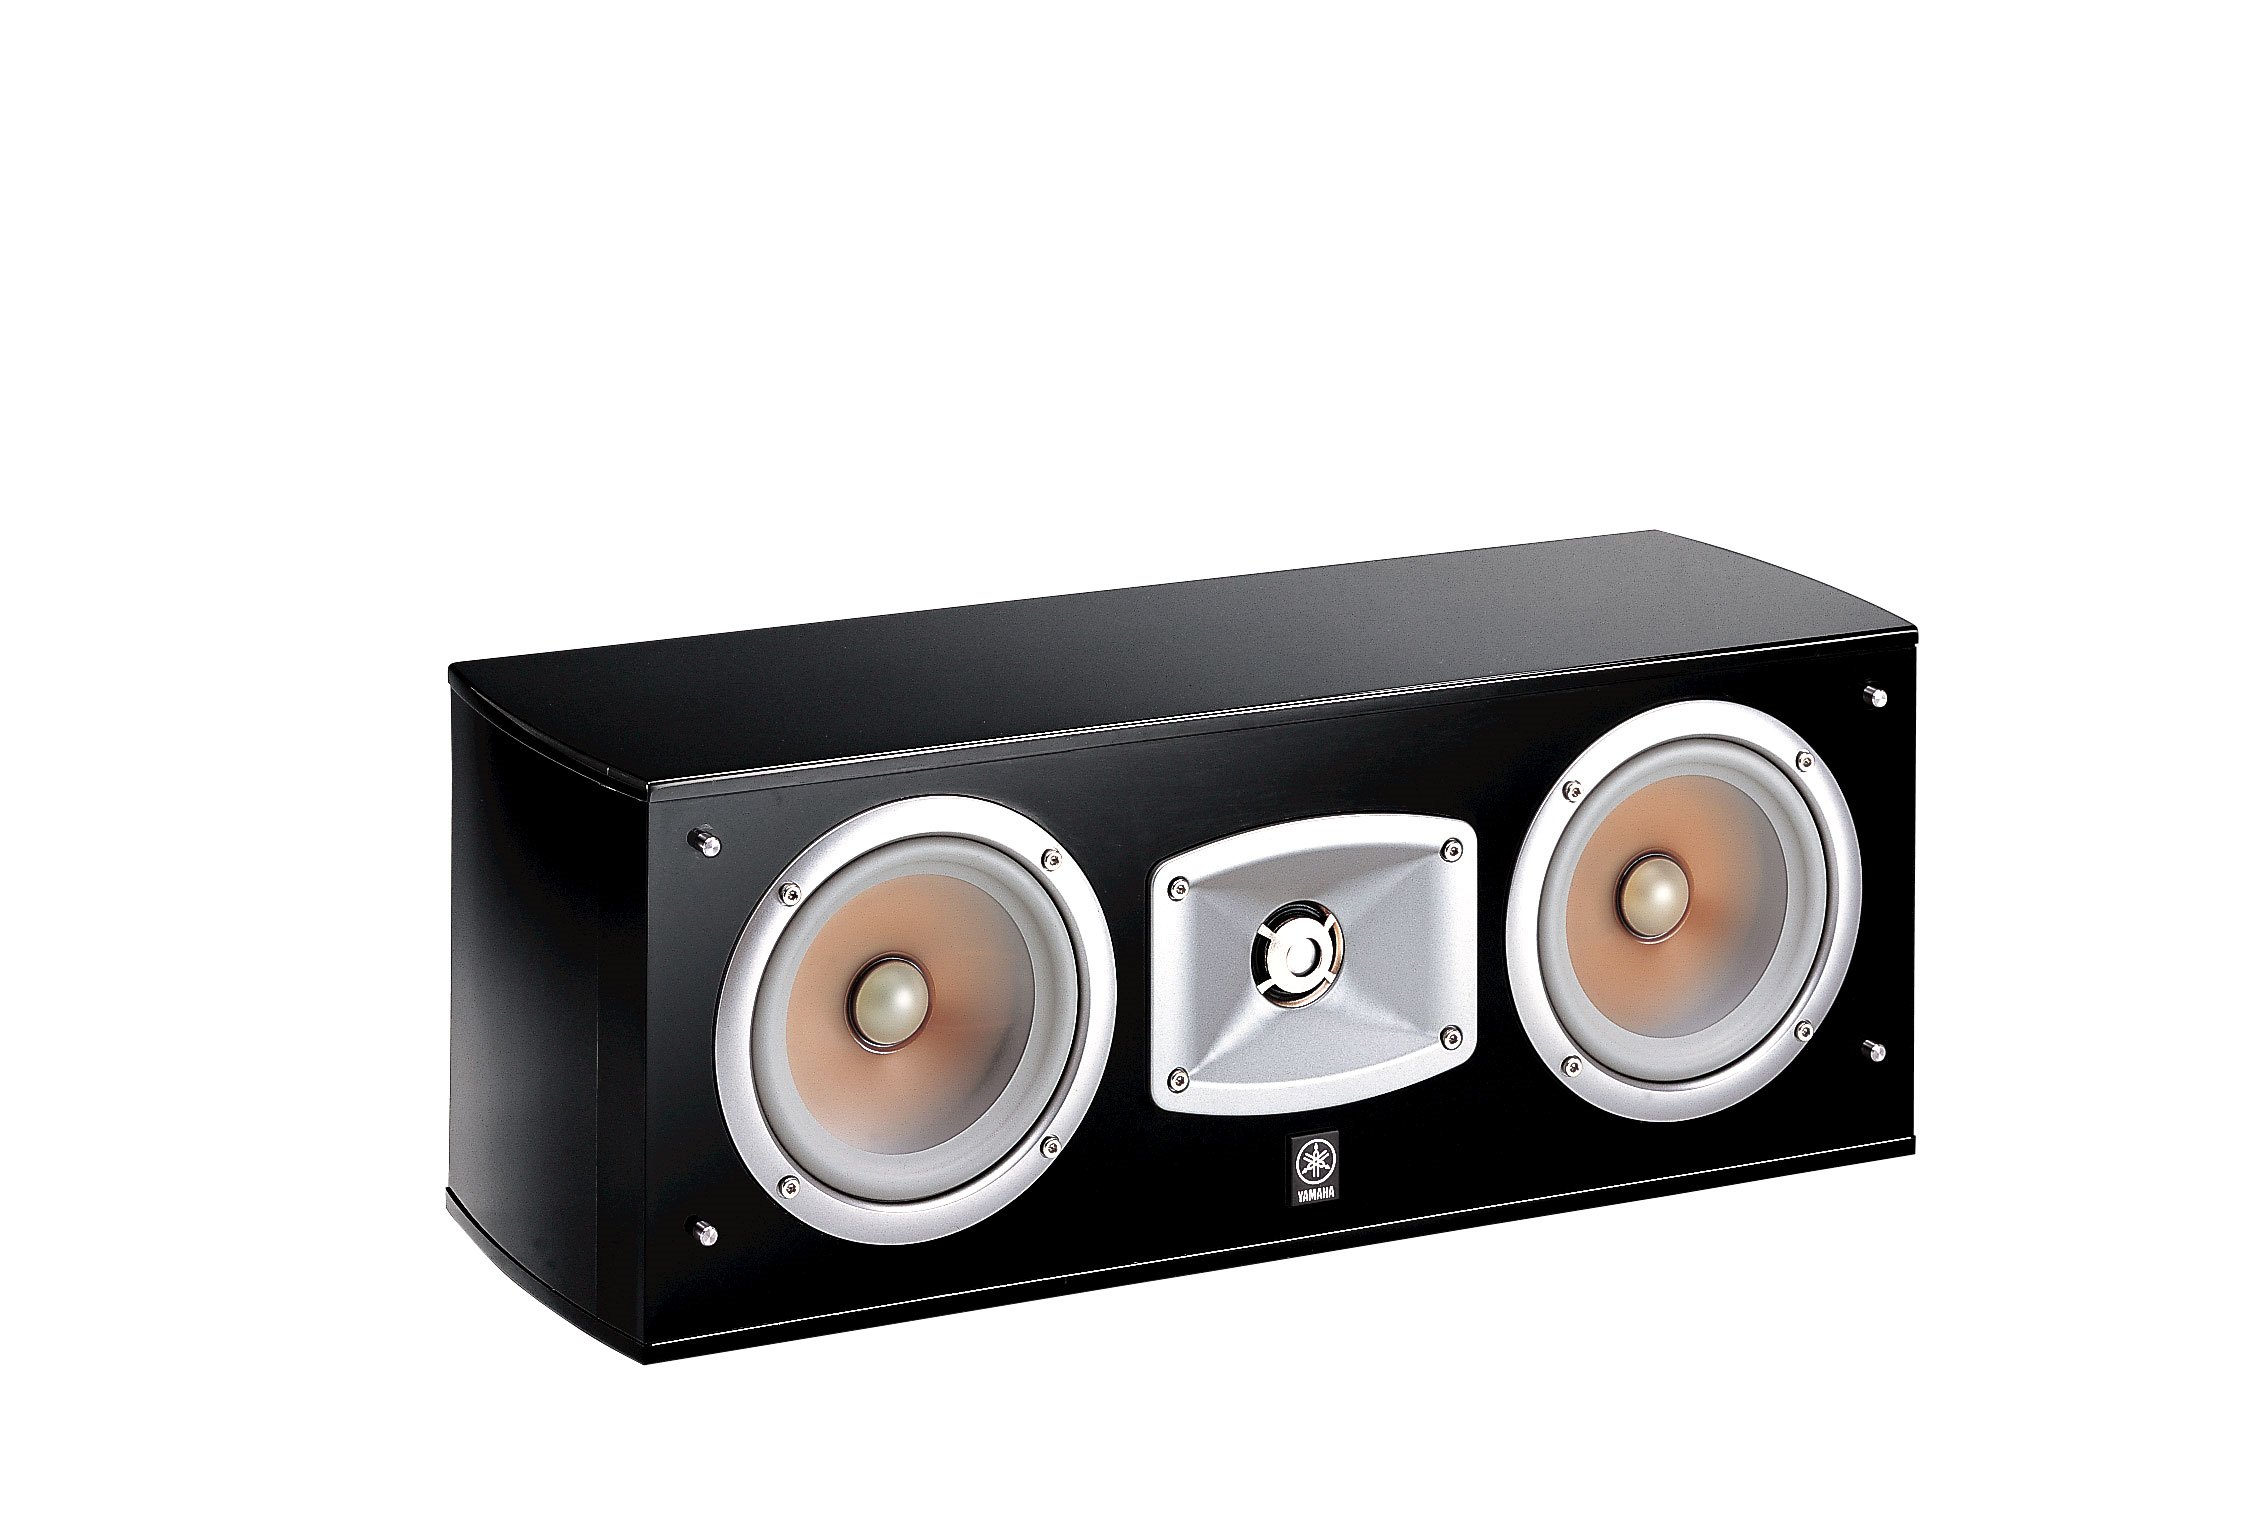 NS-C444 - Overview - Speaker Systems 